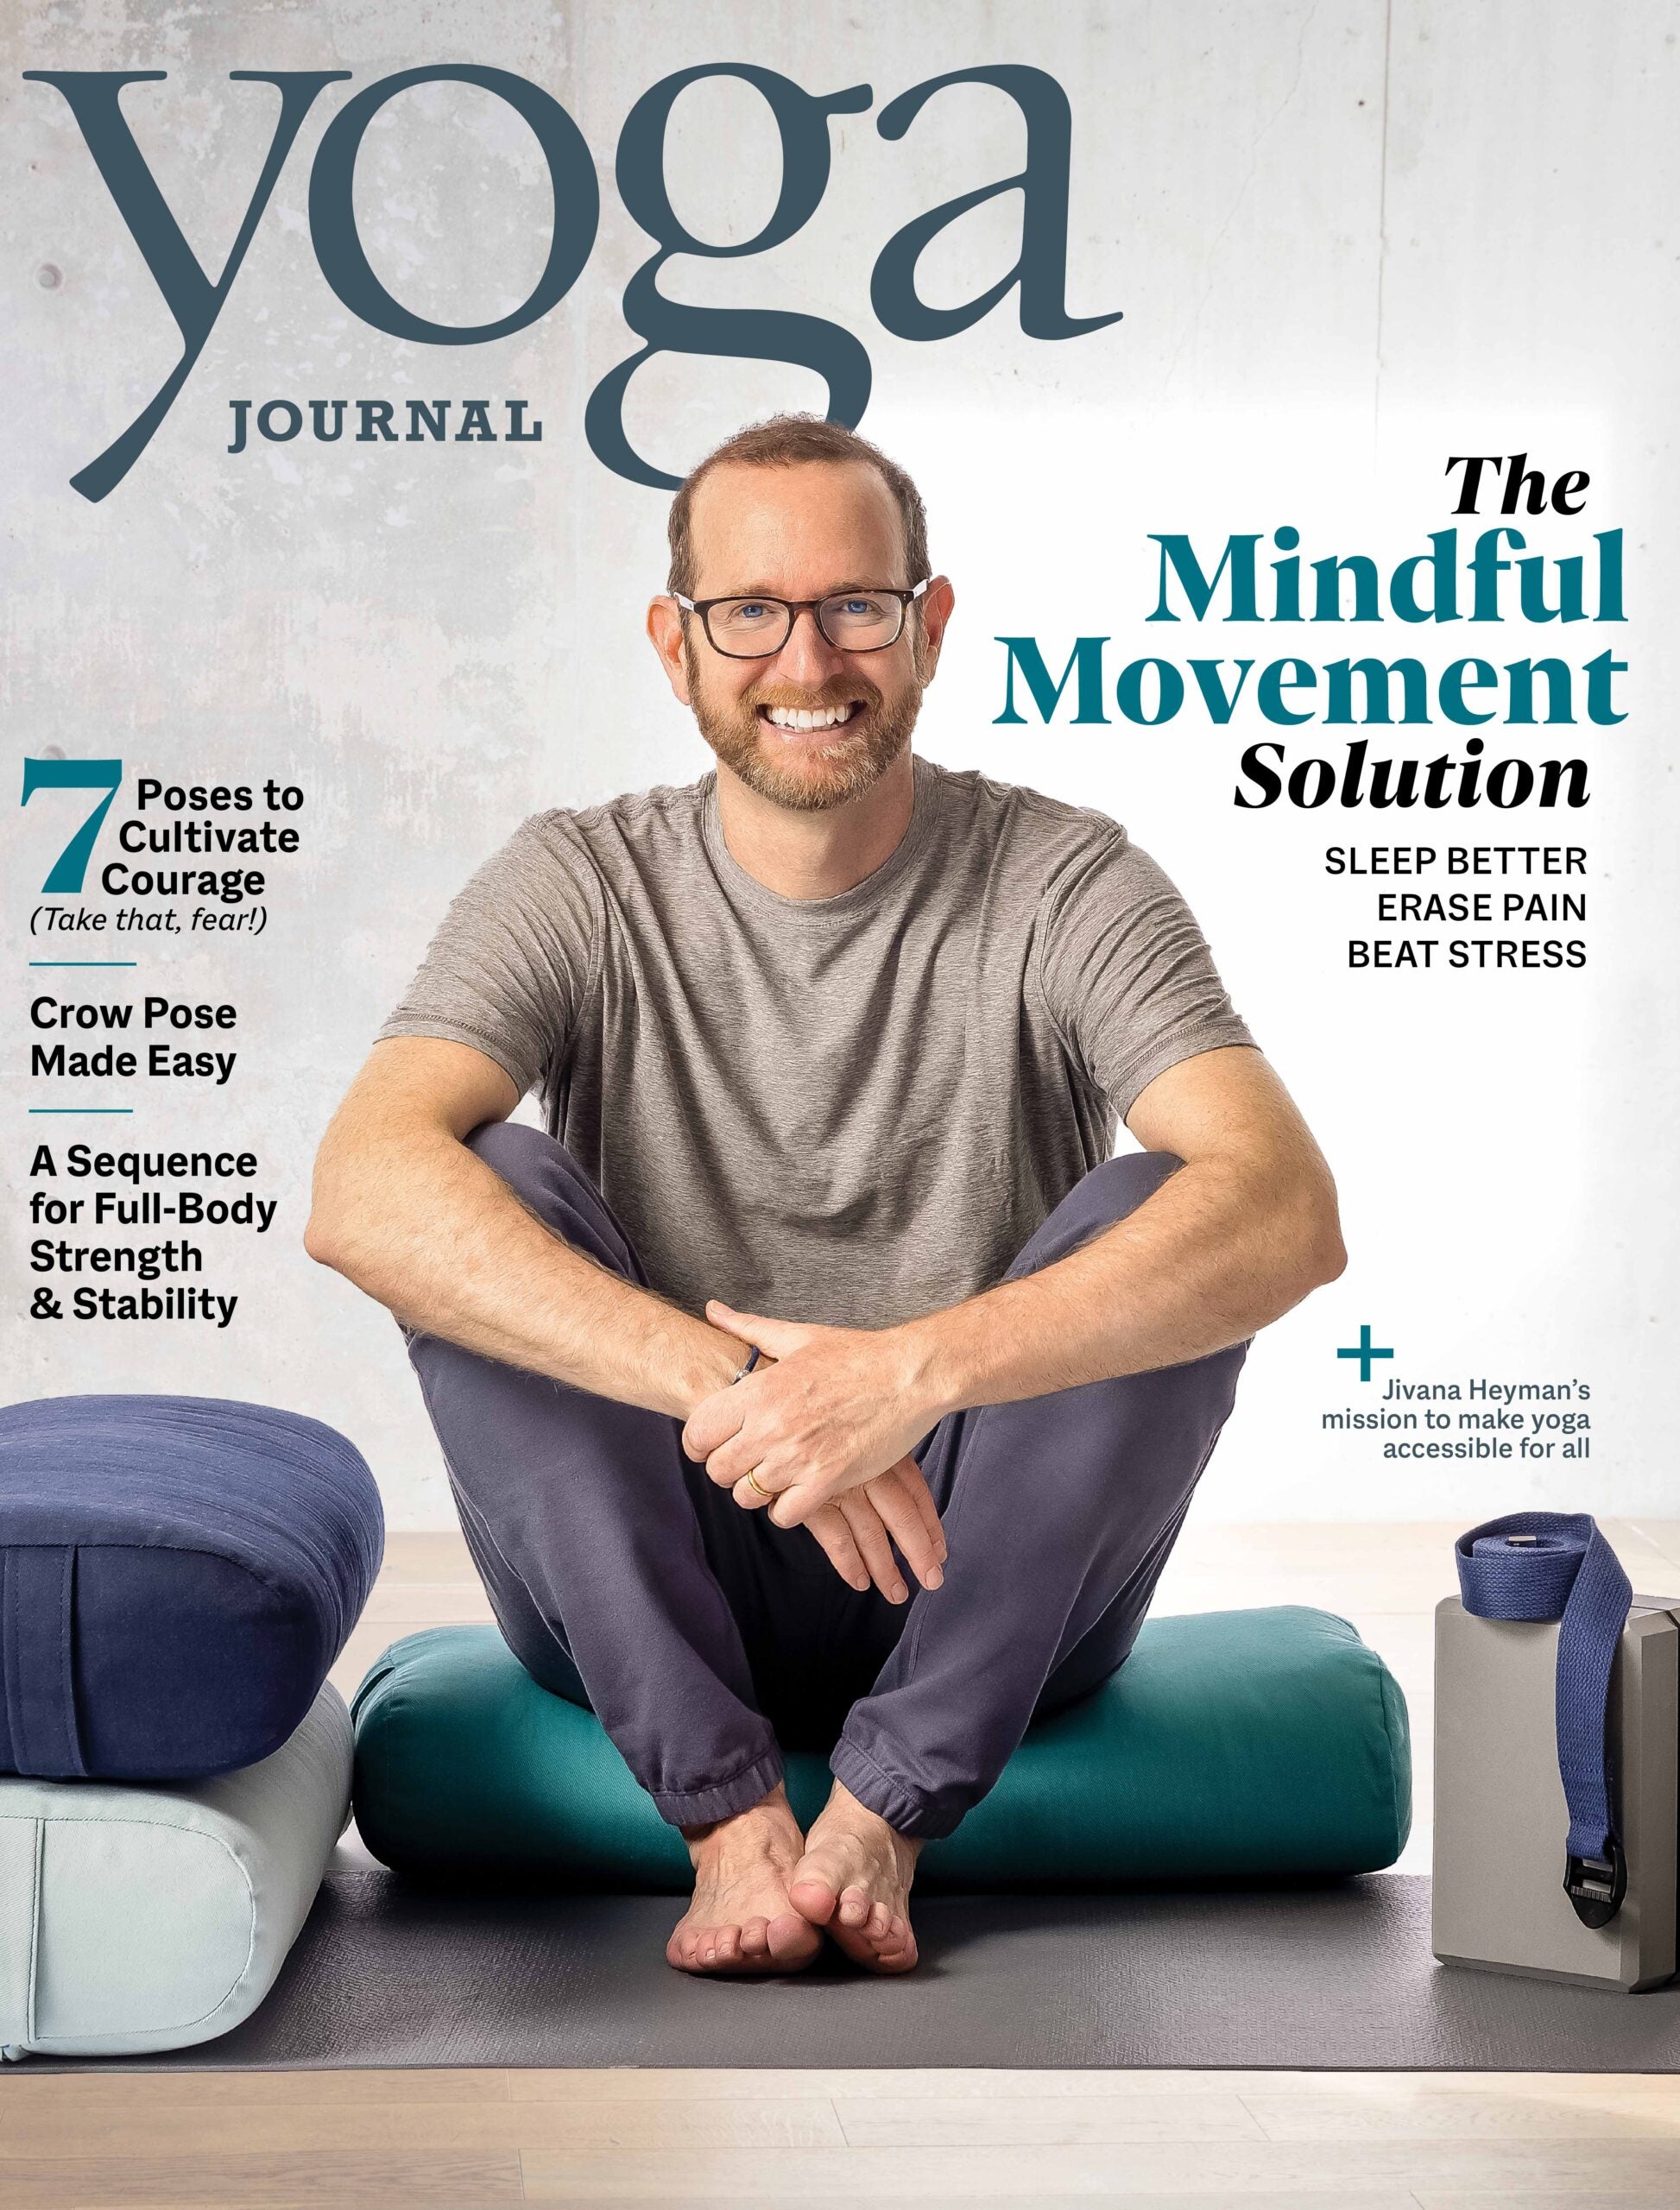 Yoga Journal's Response to the January 2019 Covers